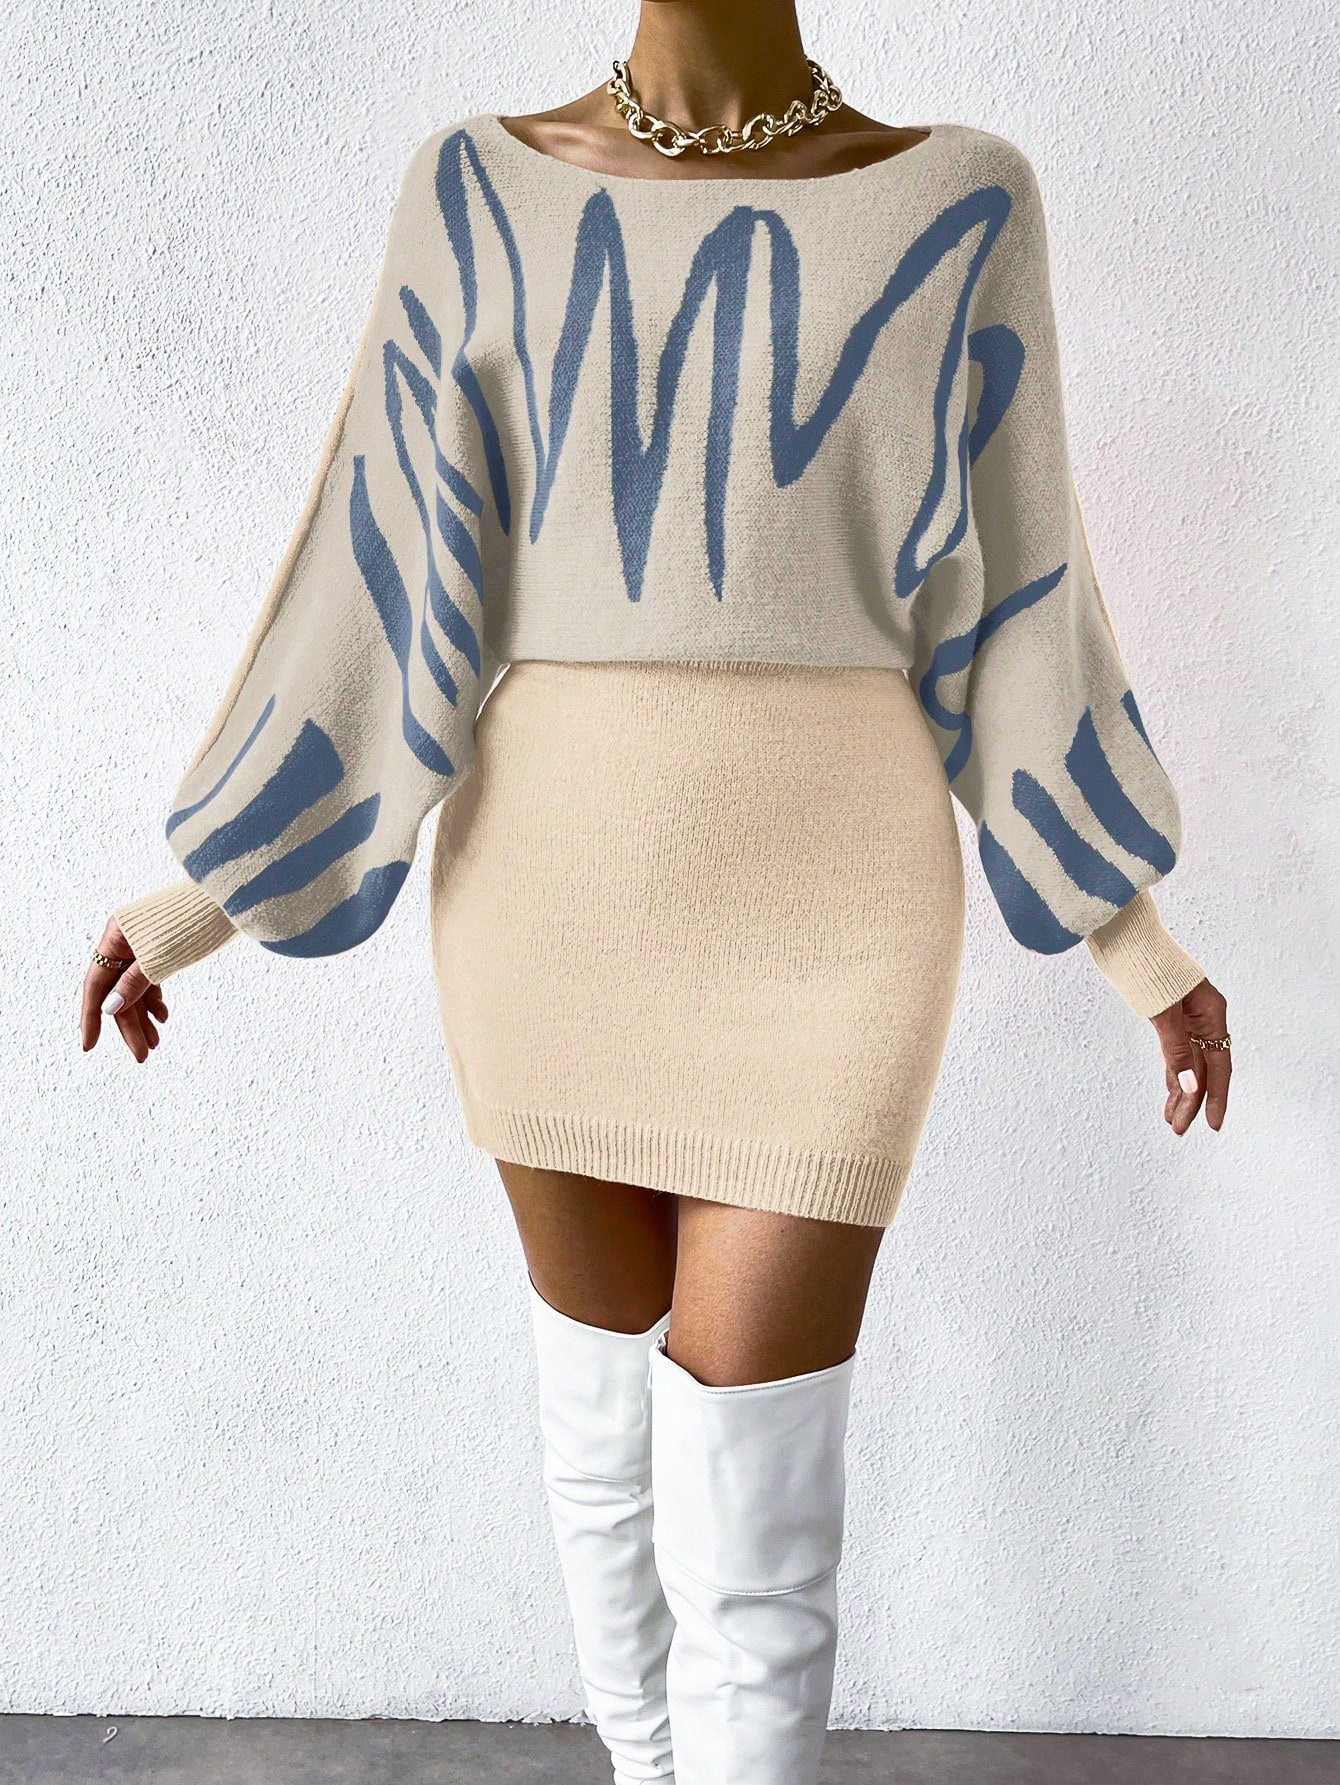 Professional rewrite: ```SHEIN Privé Batwing Sleeve Sweater Dress with Graphic Pattern```